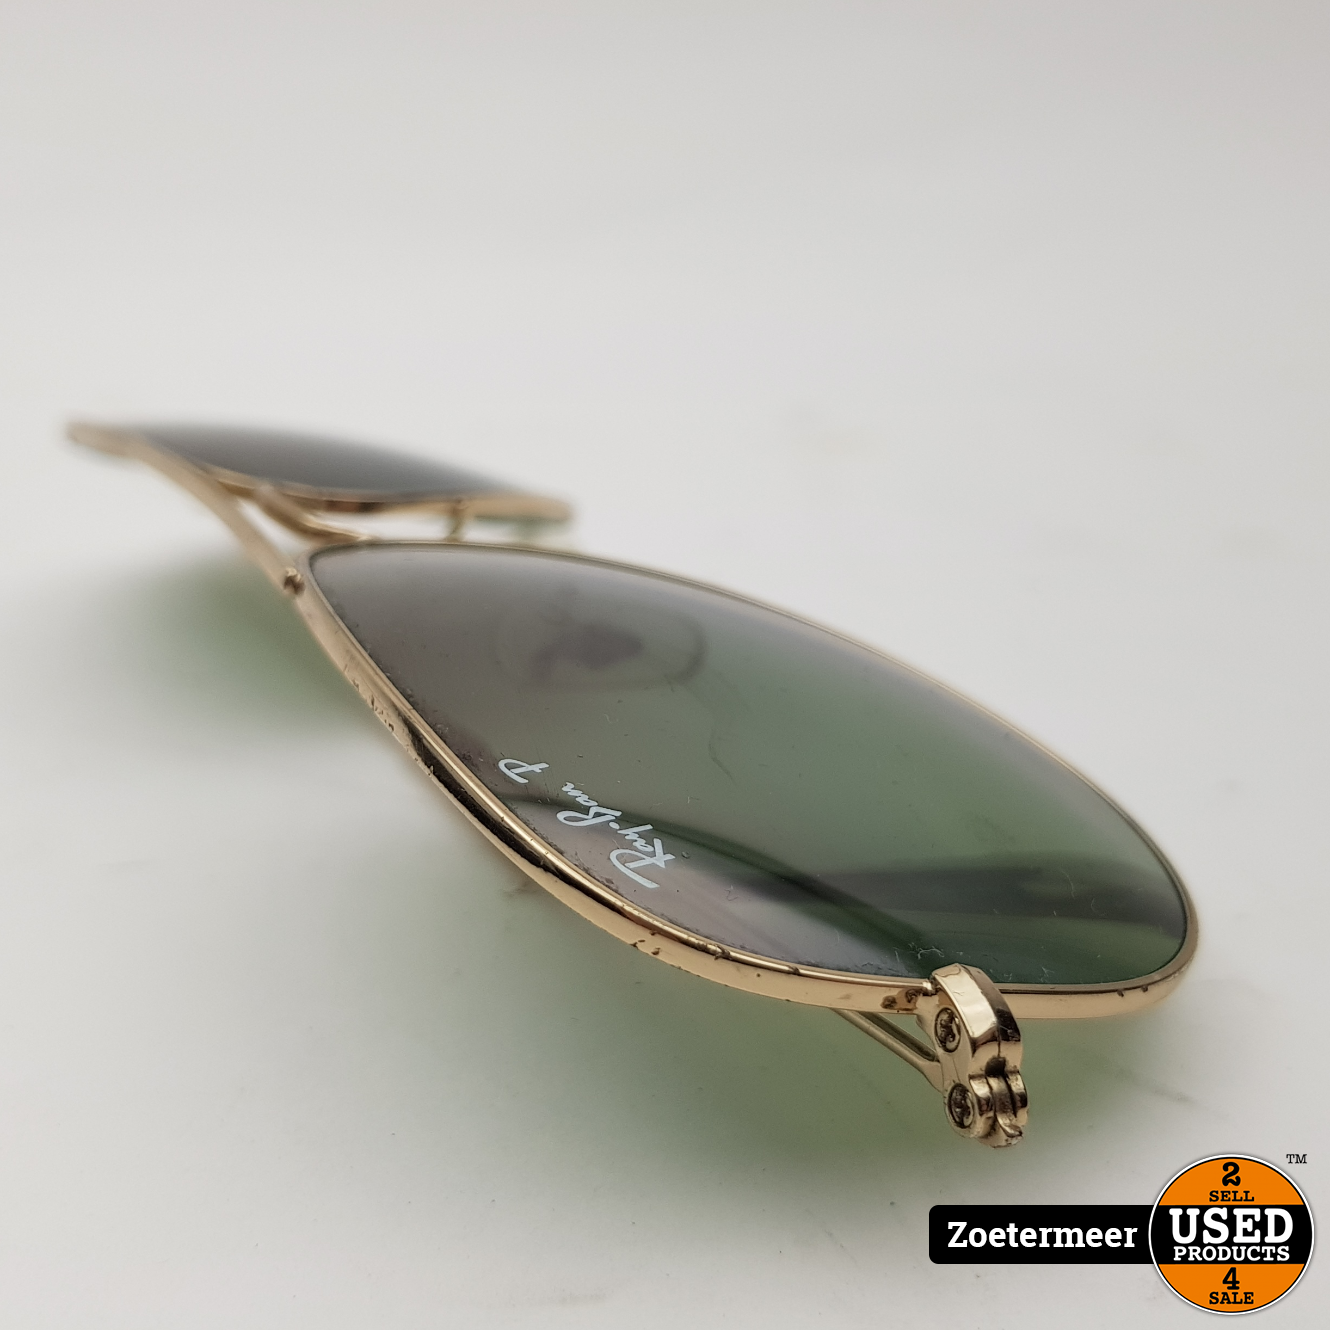 Ray Ban Rb 3025 Aviator Polarized Used Products Zoetermeer